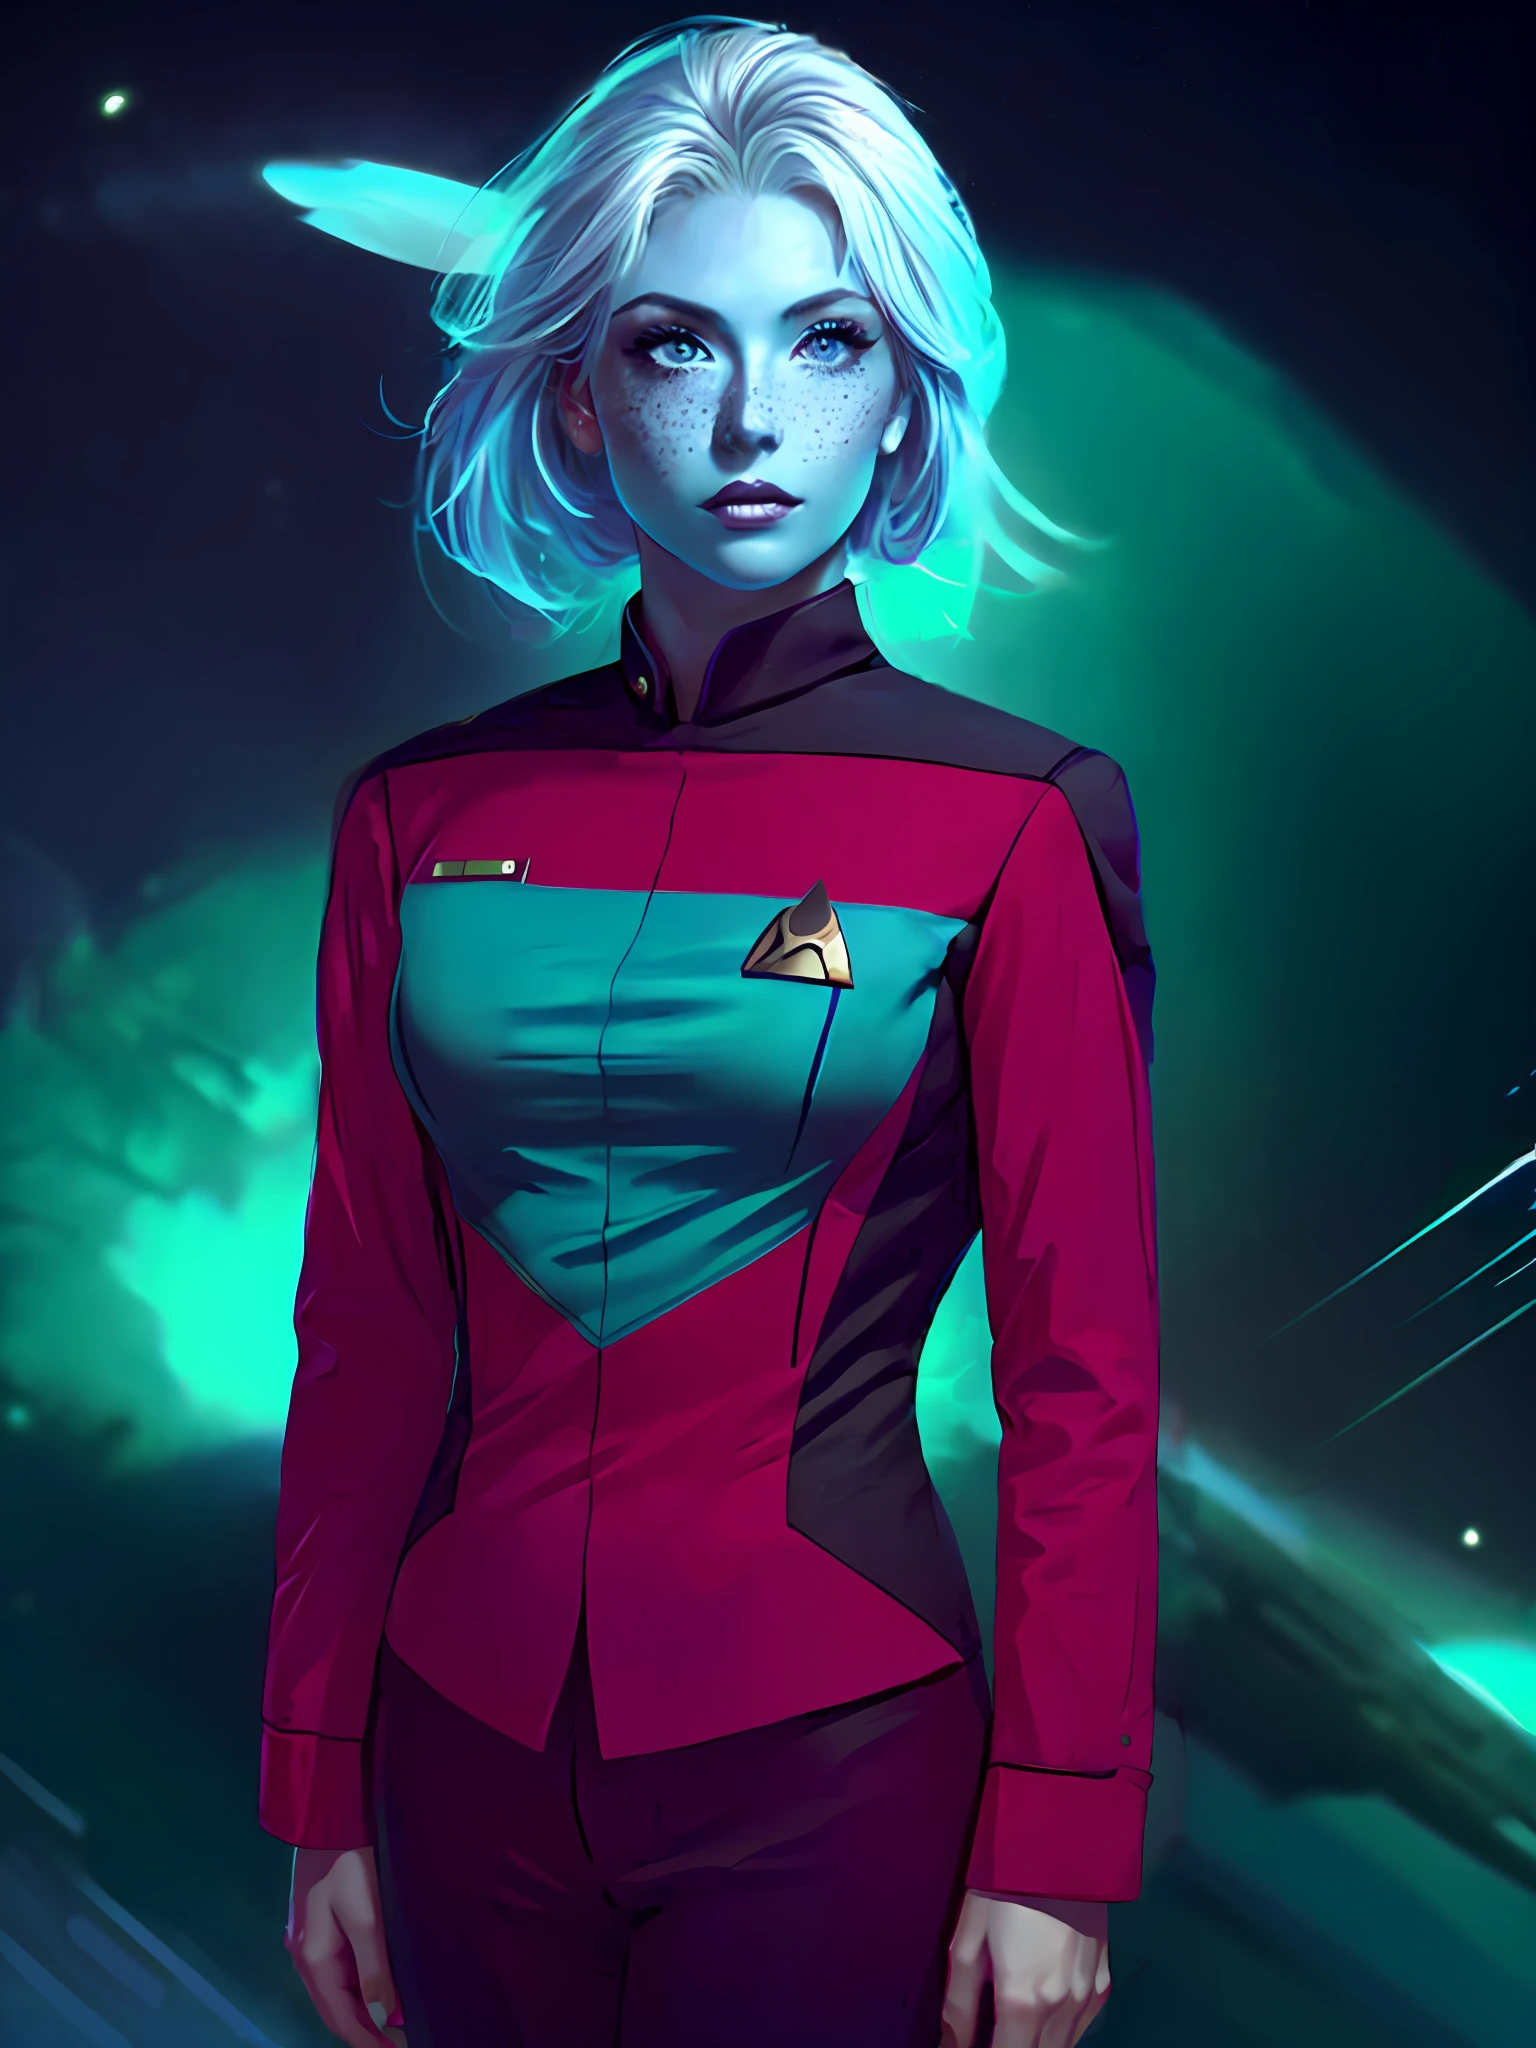 (blue skin color),(a young woman in a command s3sttngsuit uniform, red uniform:1.5), perfect body, straight hair, hairstyle, (white hair), (blue eyes), glow white particles, spaceship background, (masterpiece, top quality, best quality, official art, beautiful and aesthetic:1.2),(cute face, young face:1.3),freckles